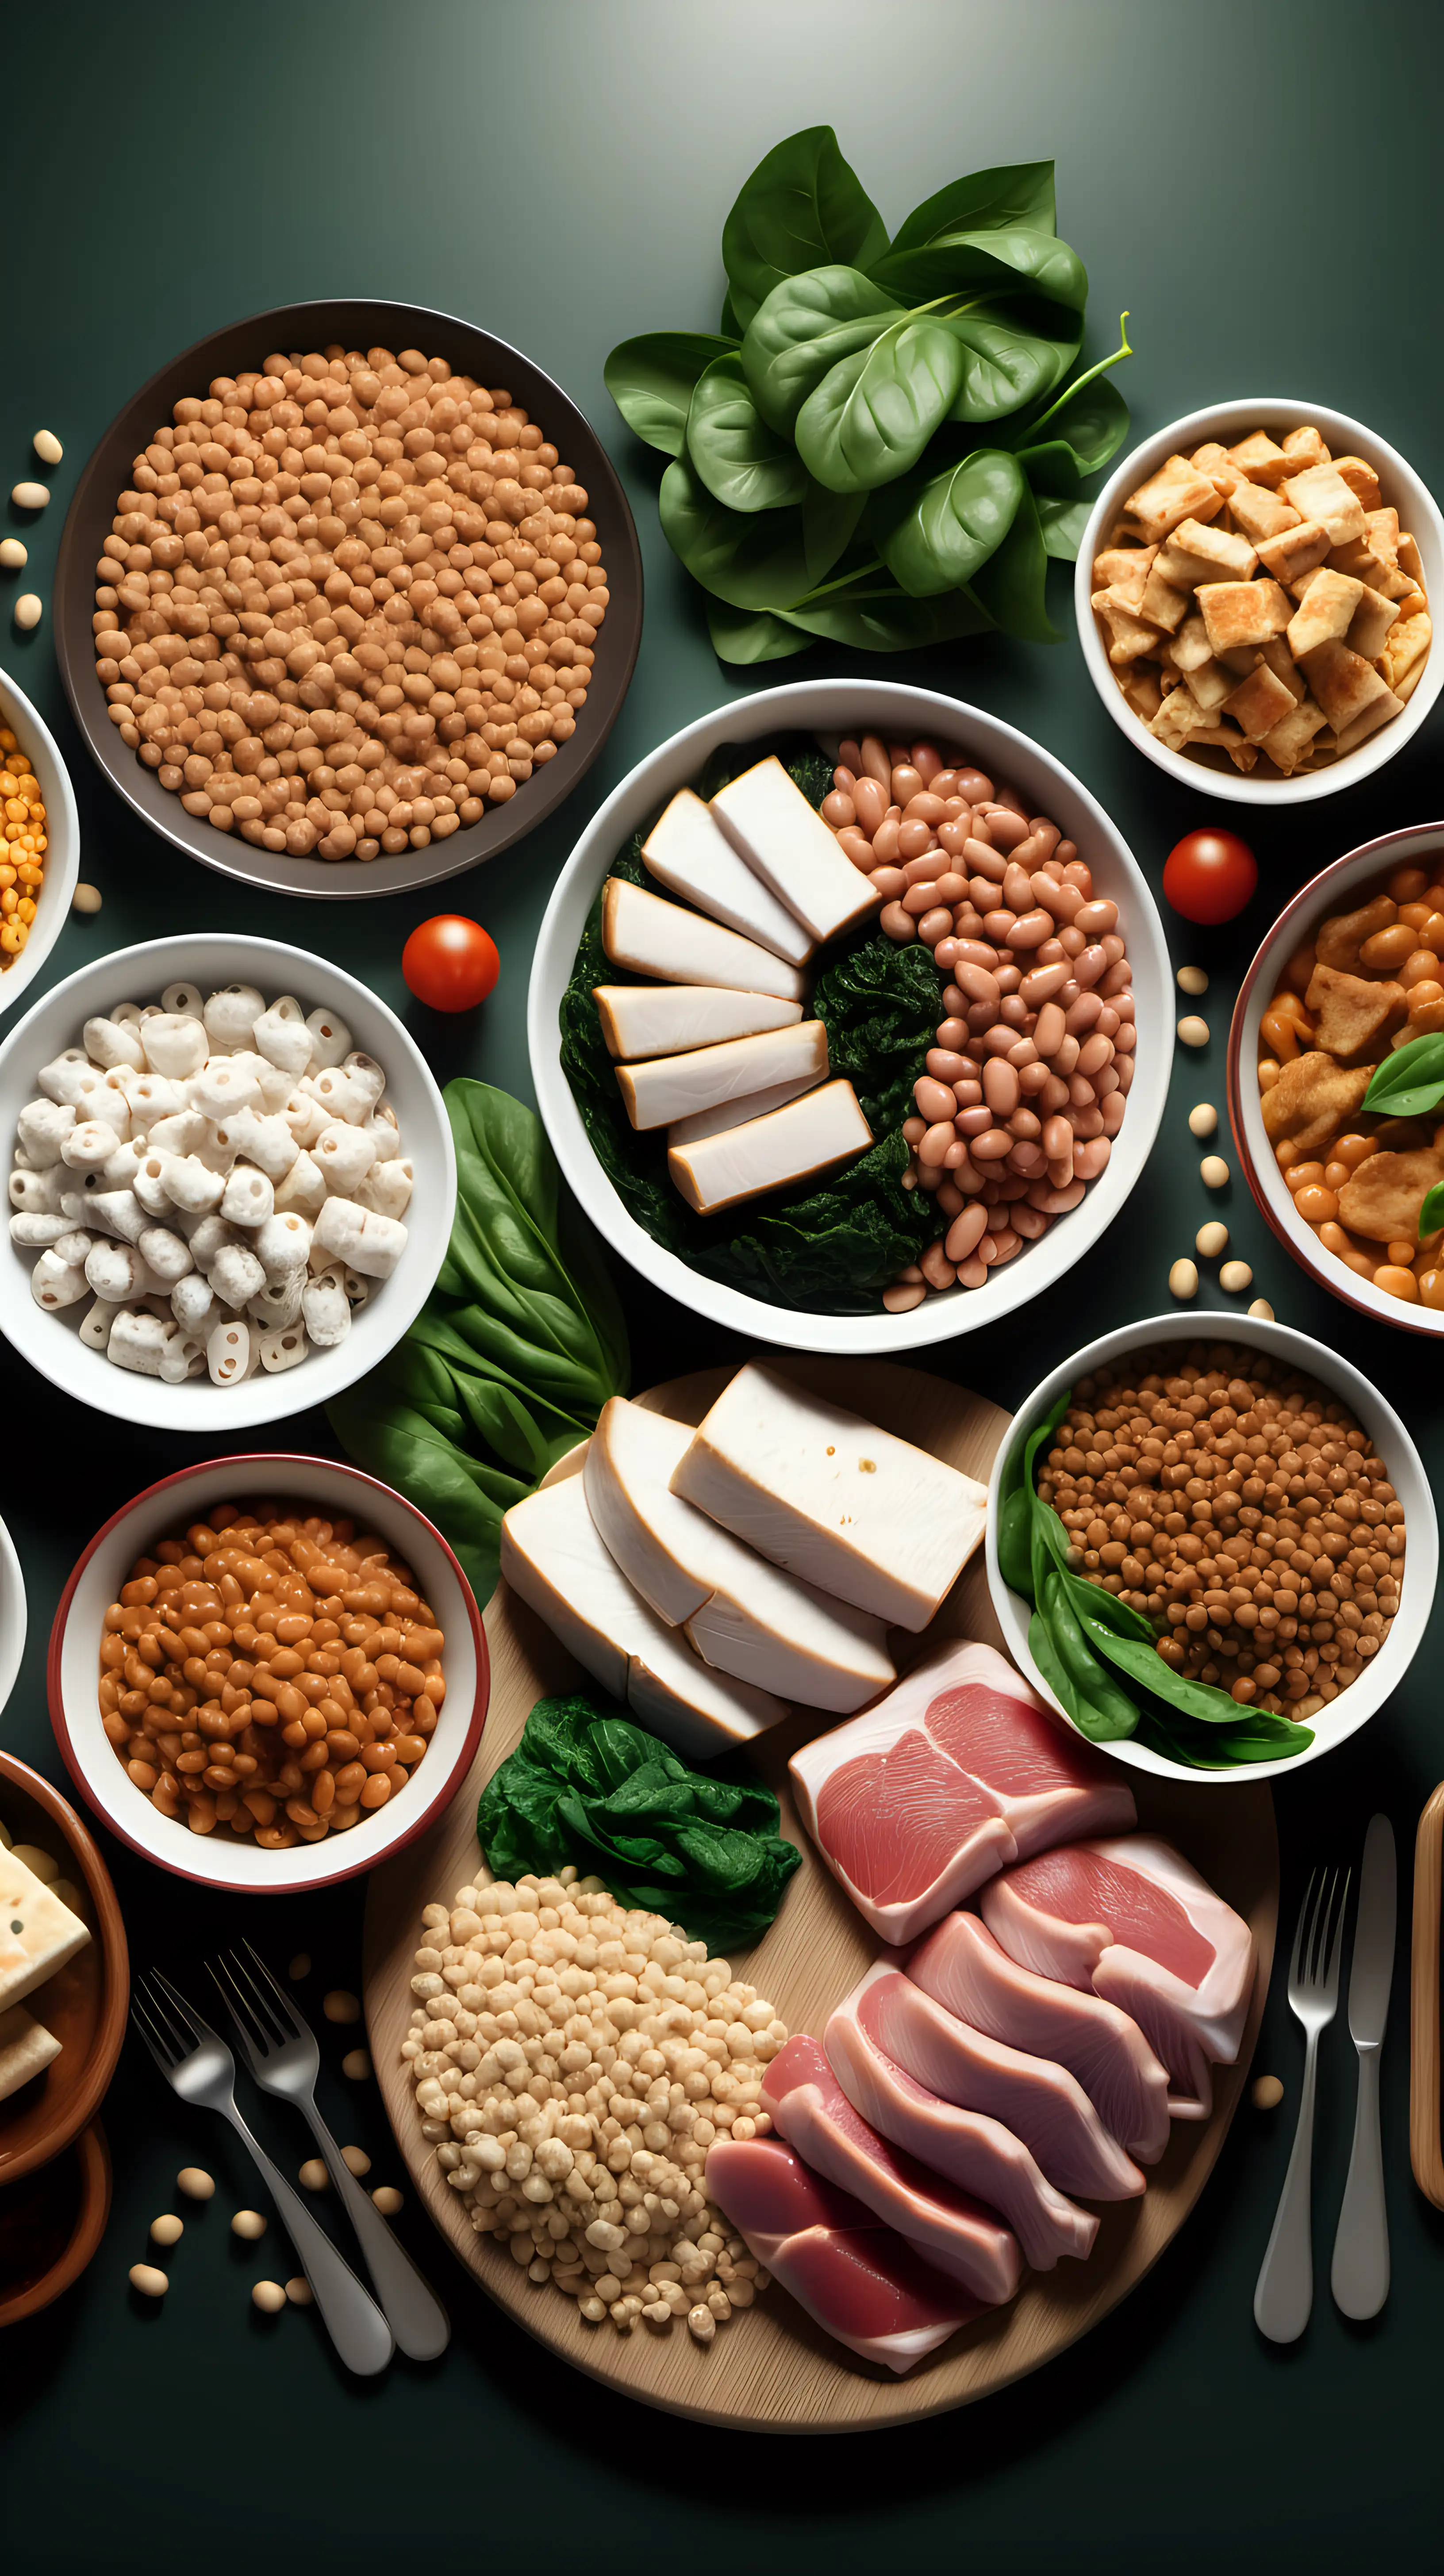 A table with lean meats, poultry, fish, beans, lentils, tofu, spinach, and fortified cereals, high quality image 4K, 3D, high resolution image